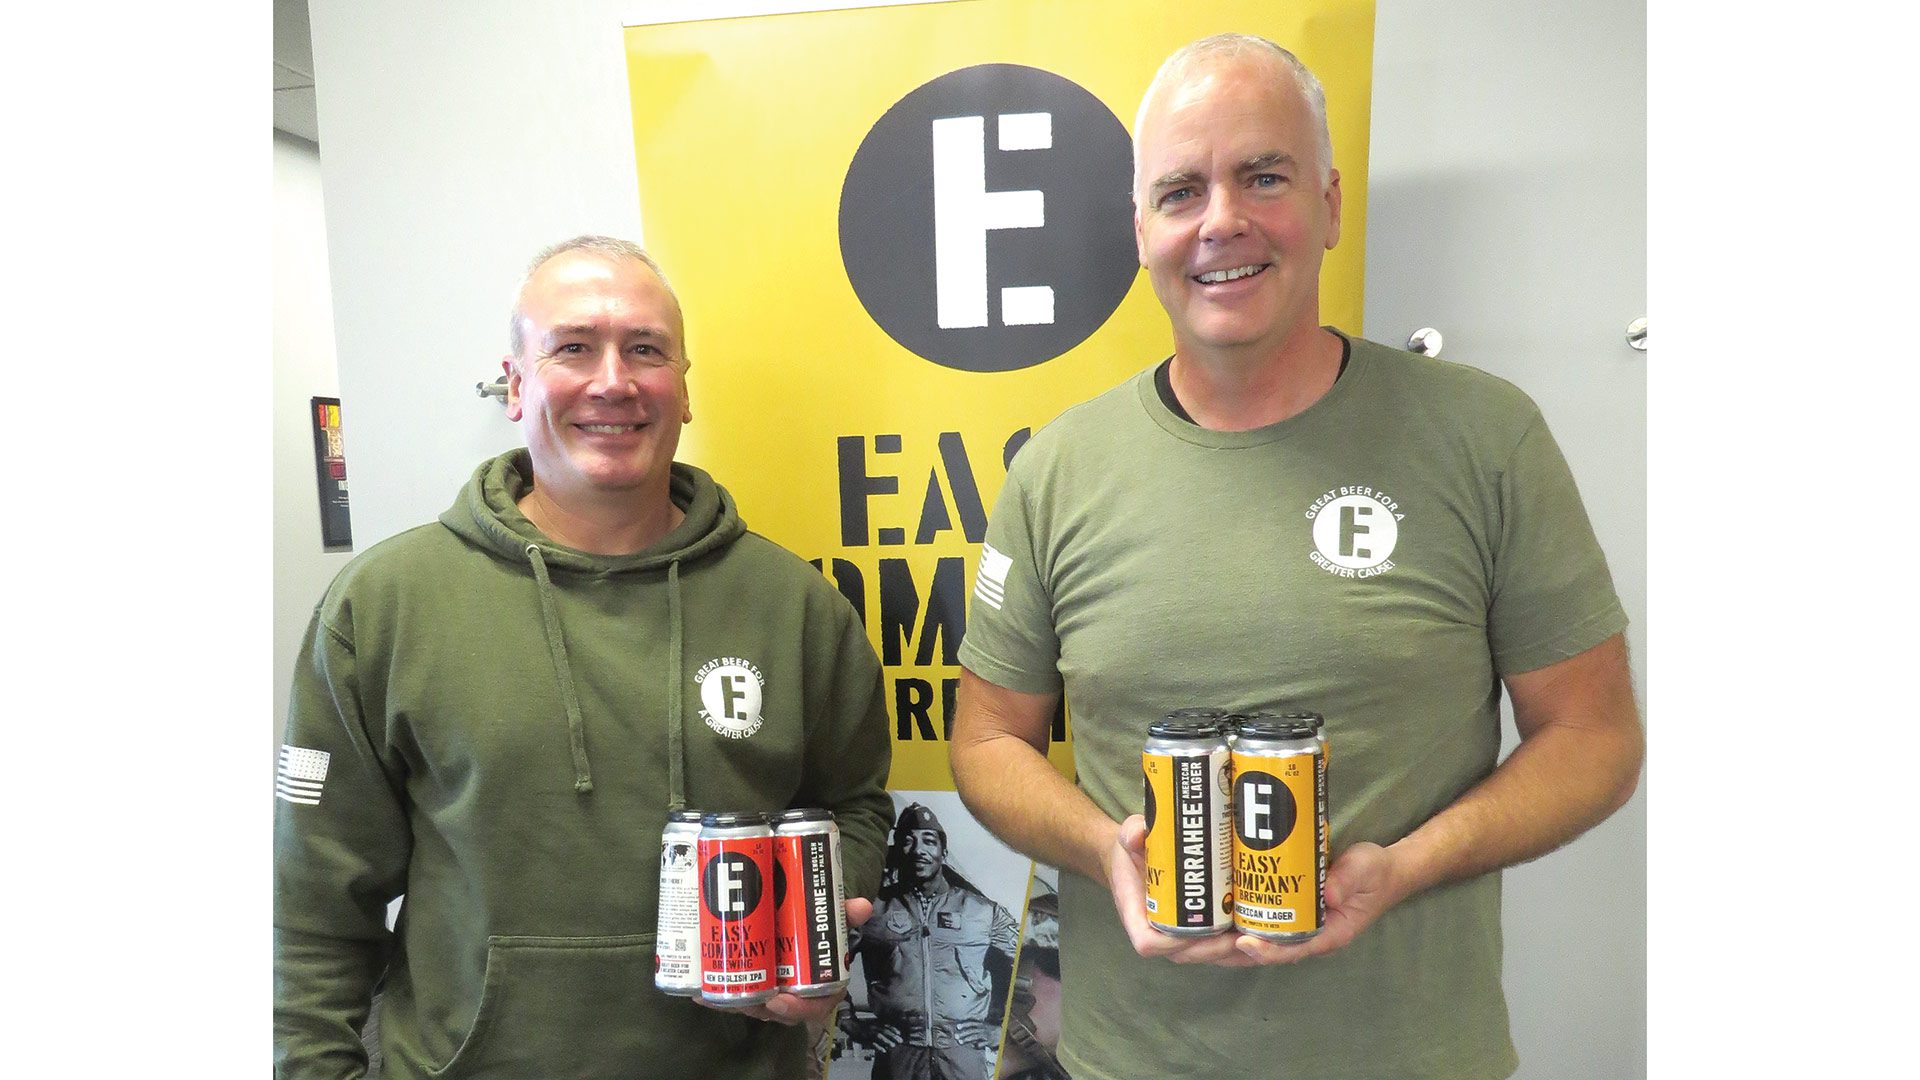 Jeff St. Jean, left, and John DeVoie, co-founders of Easy Company Brewing